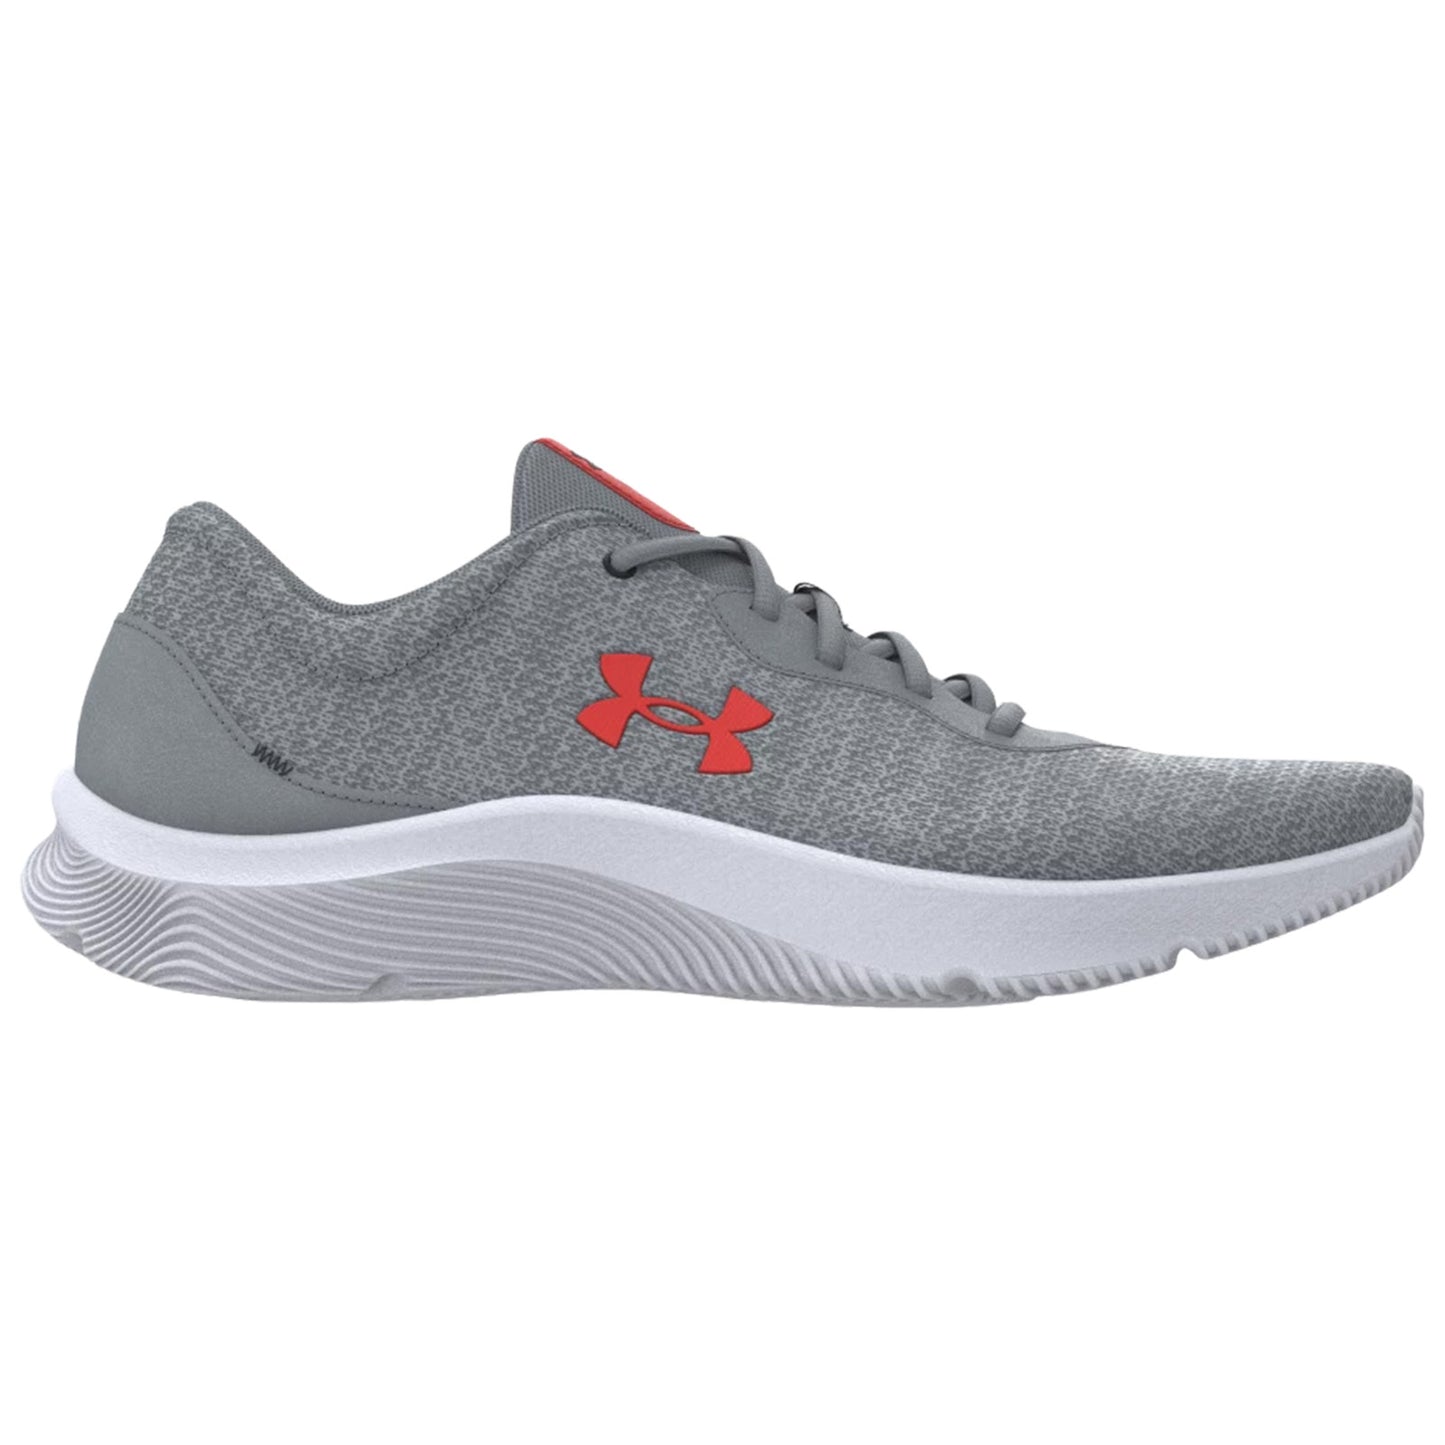 Under Armour Mens Mojo 2 Sportstyle Trainers